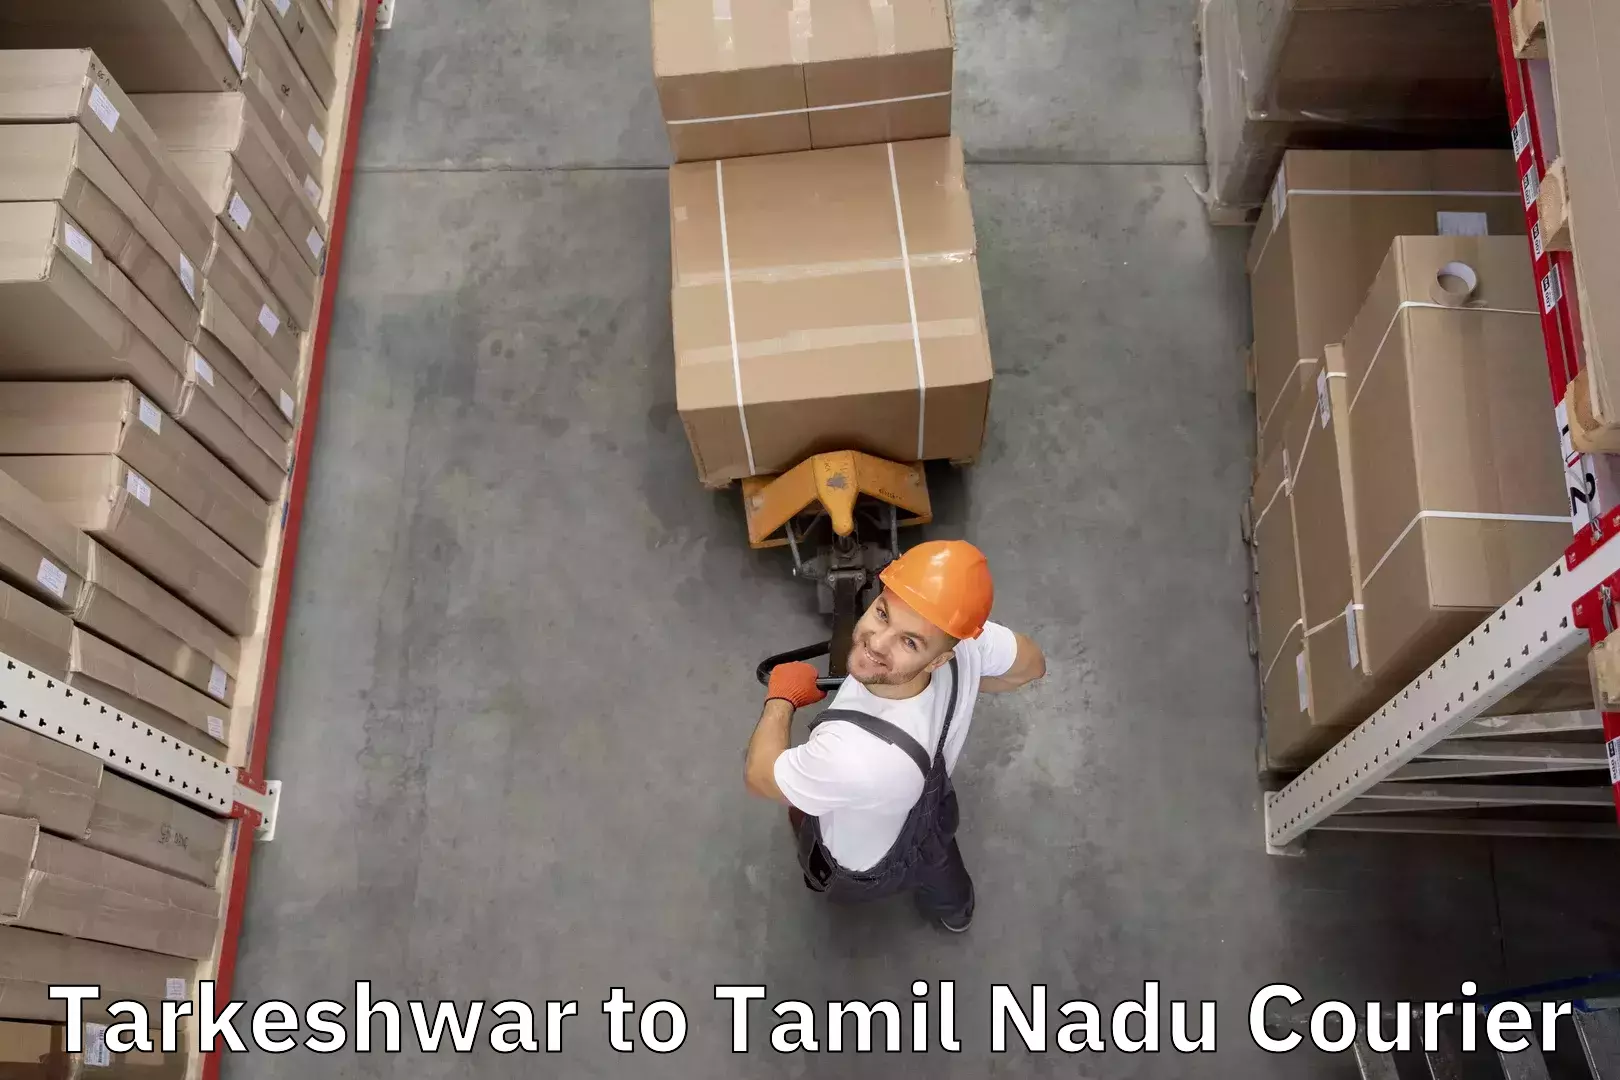 Customized luggage delivery in Tarkeshwar to Melmaruvathur